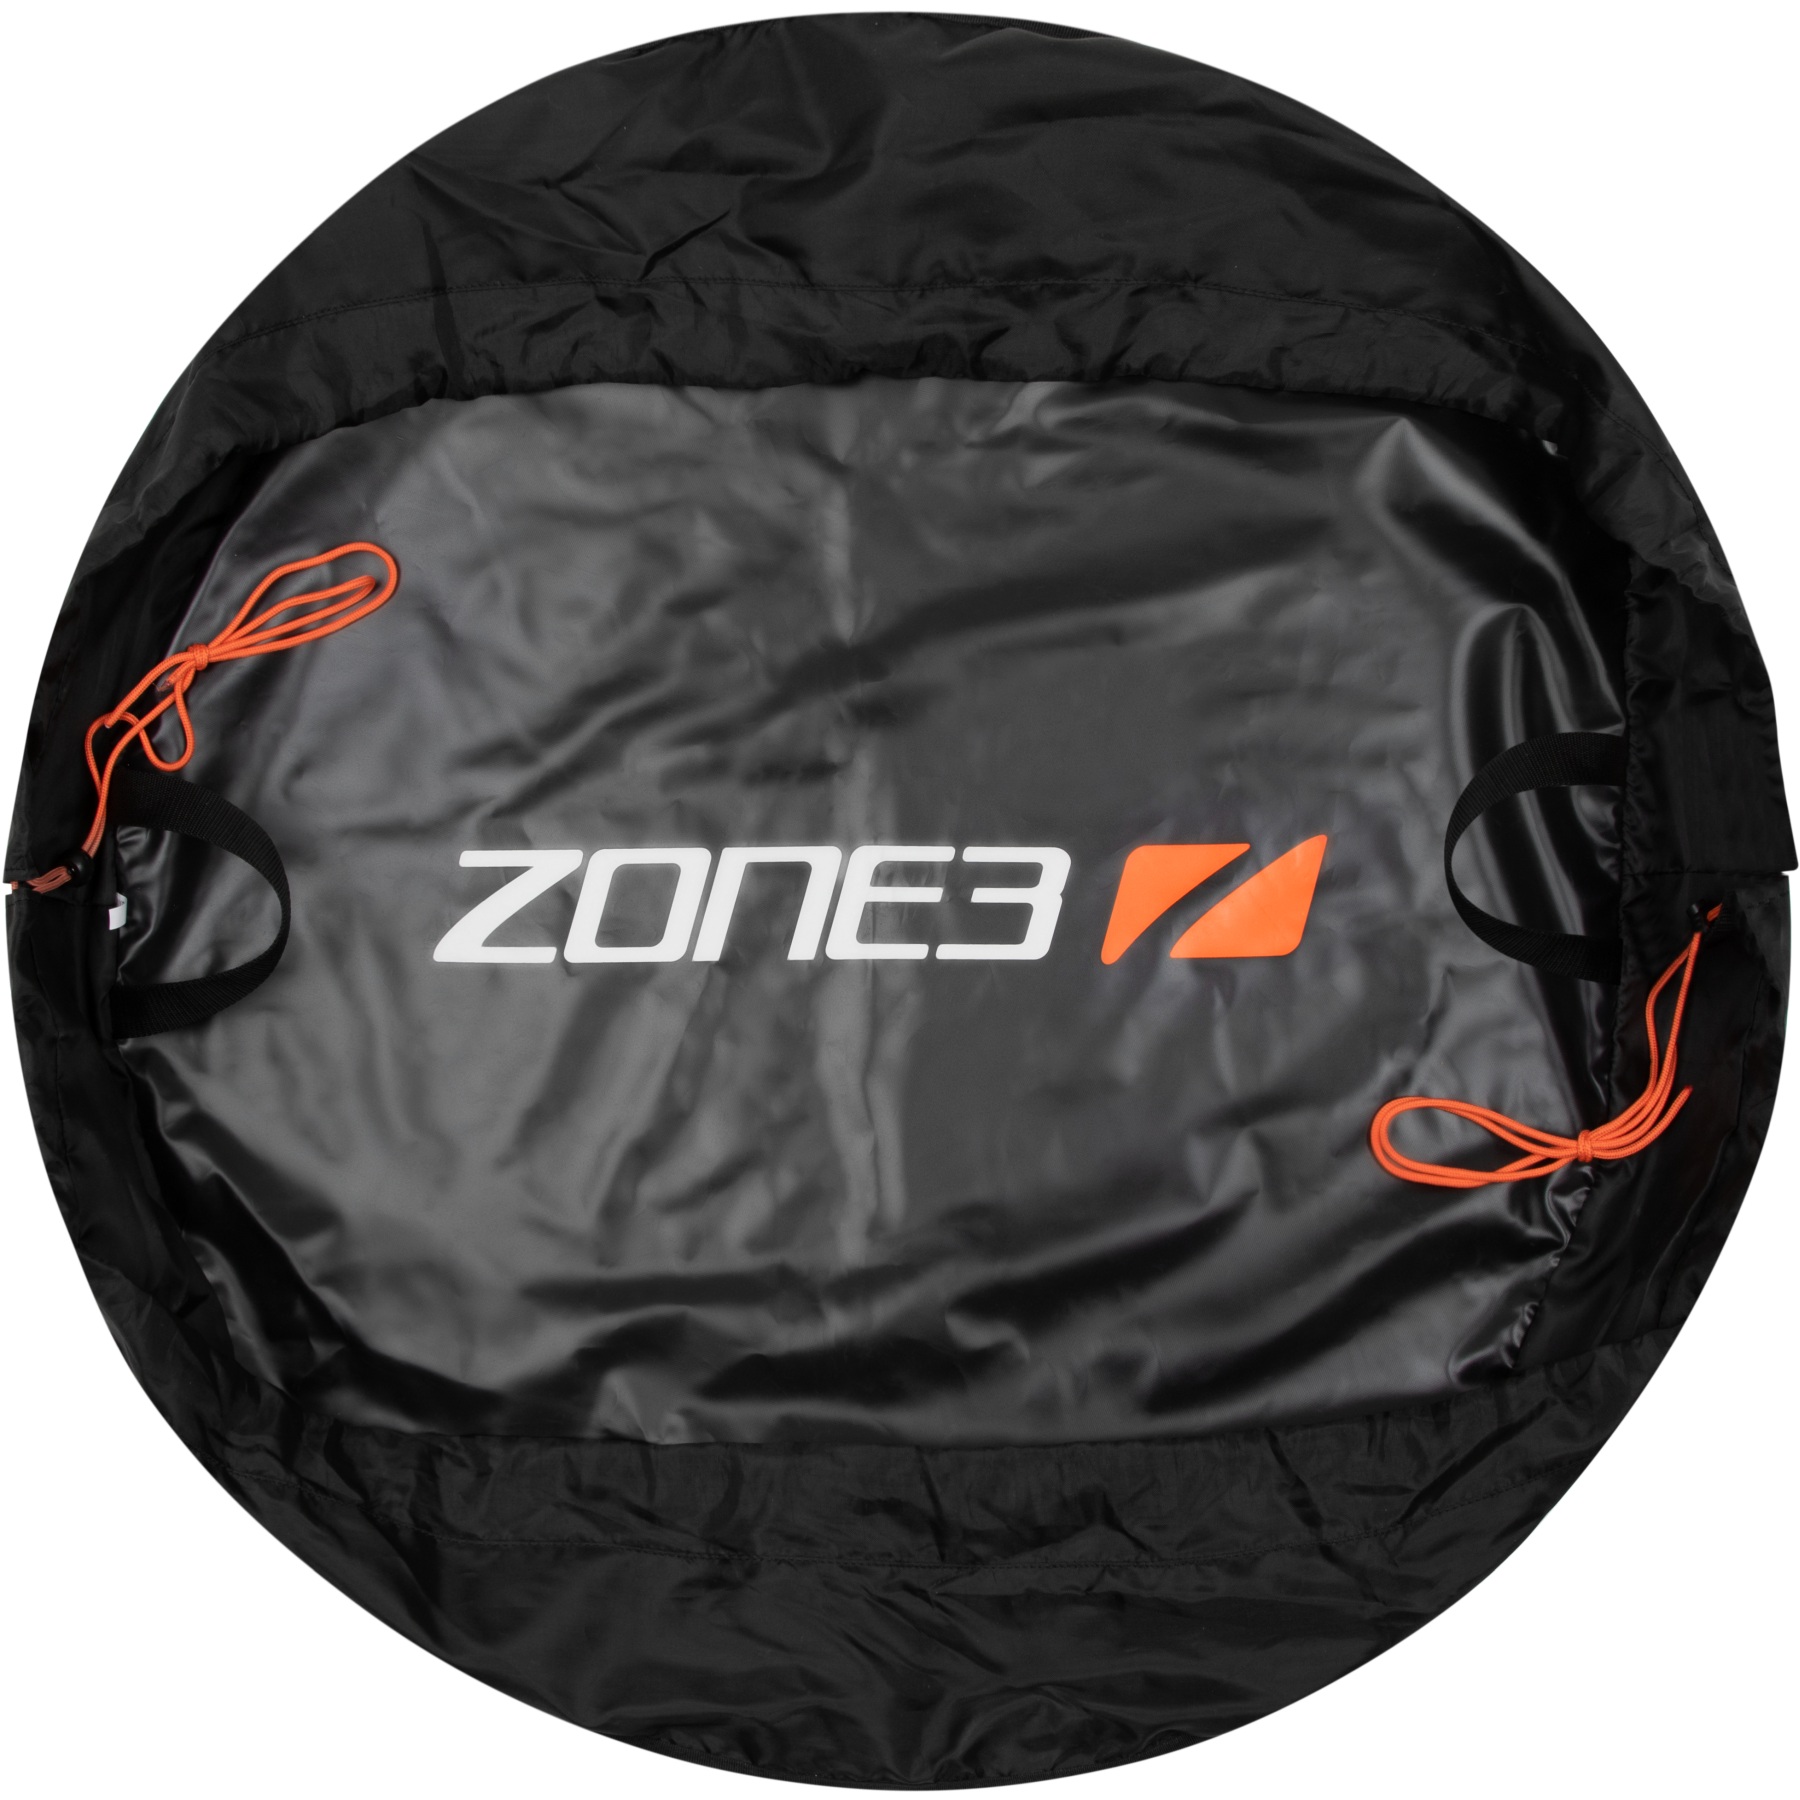 Picture of Zone3 Wetsuit Changing Mat - black